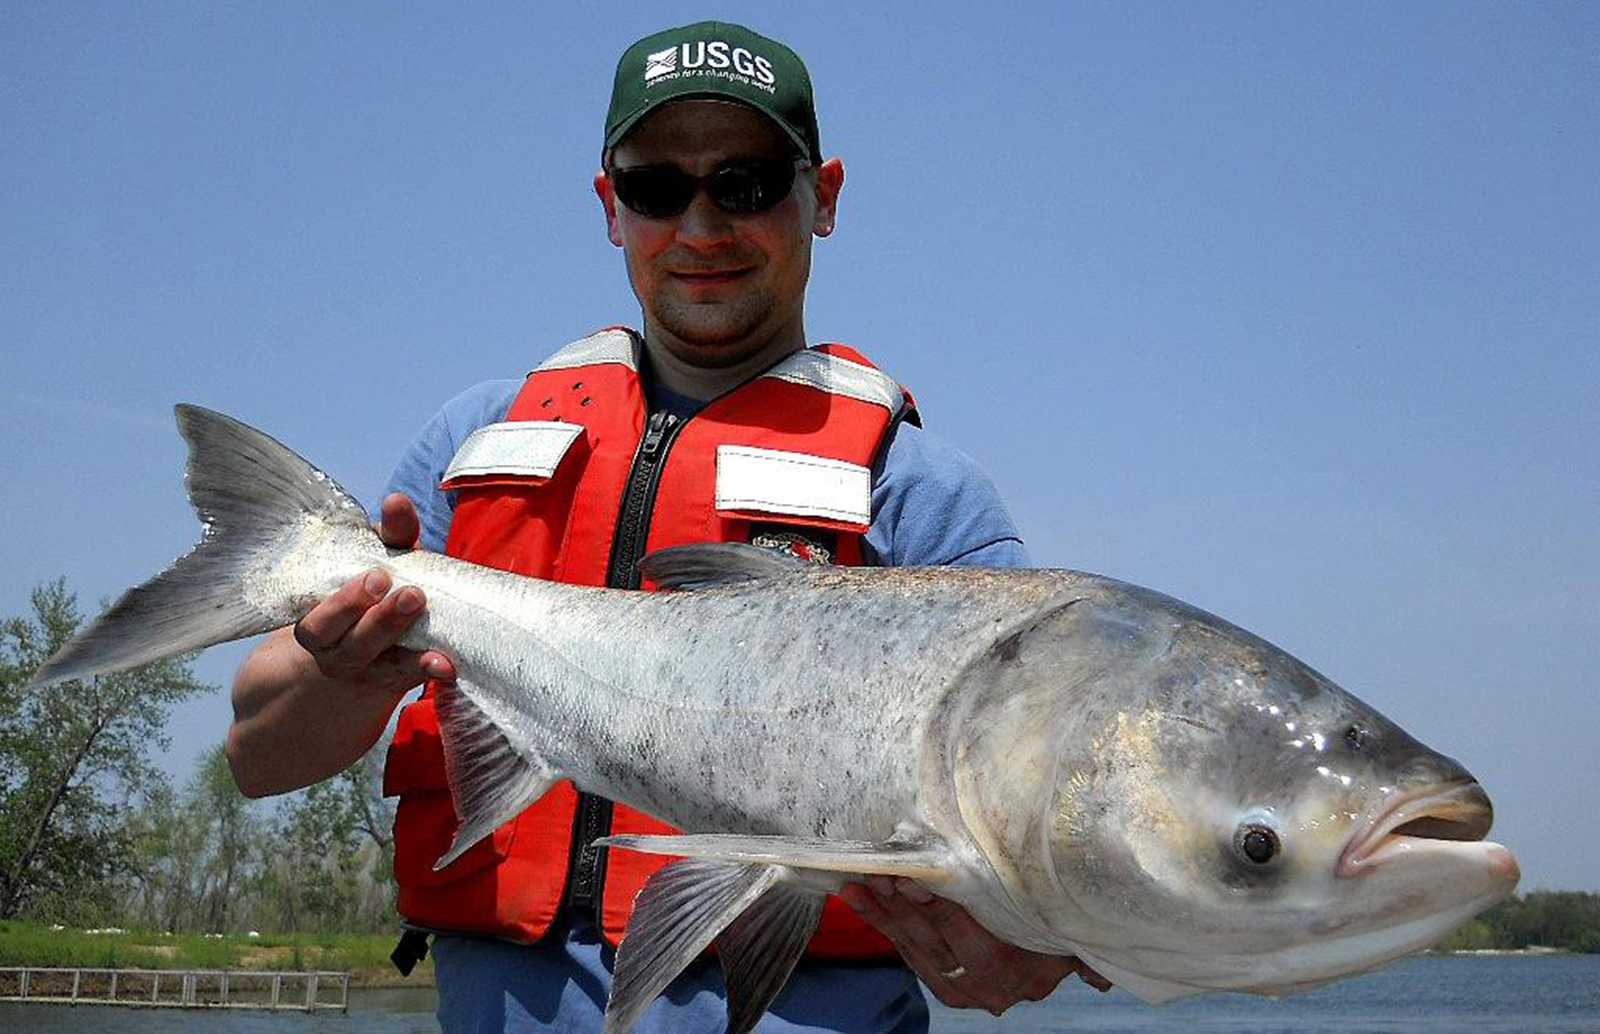 A USGC fishing and wildlife professional holds up to the camera a large Asian carp fish while standing on the edge of a lake.